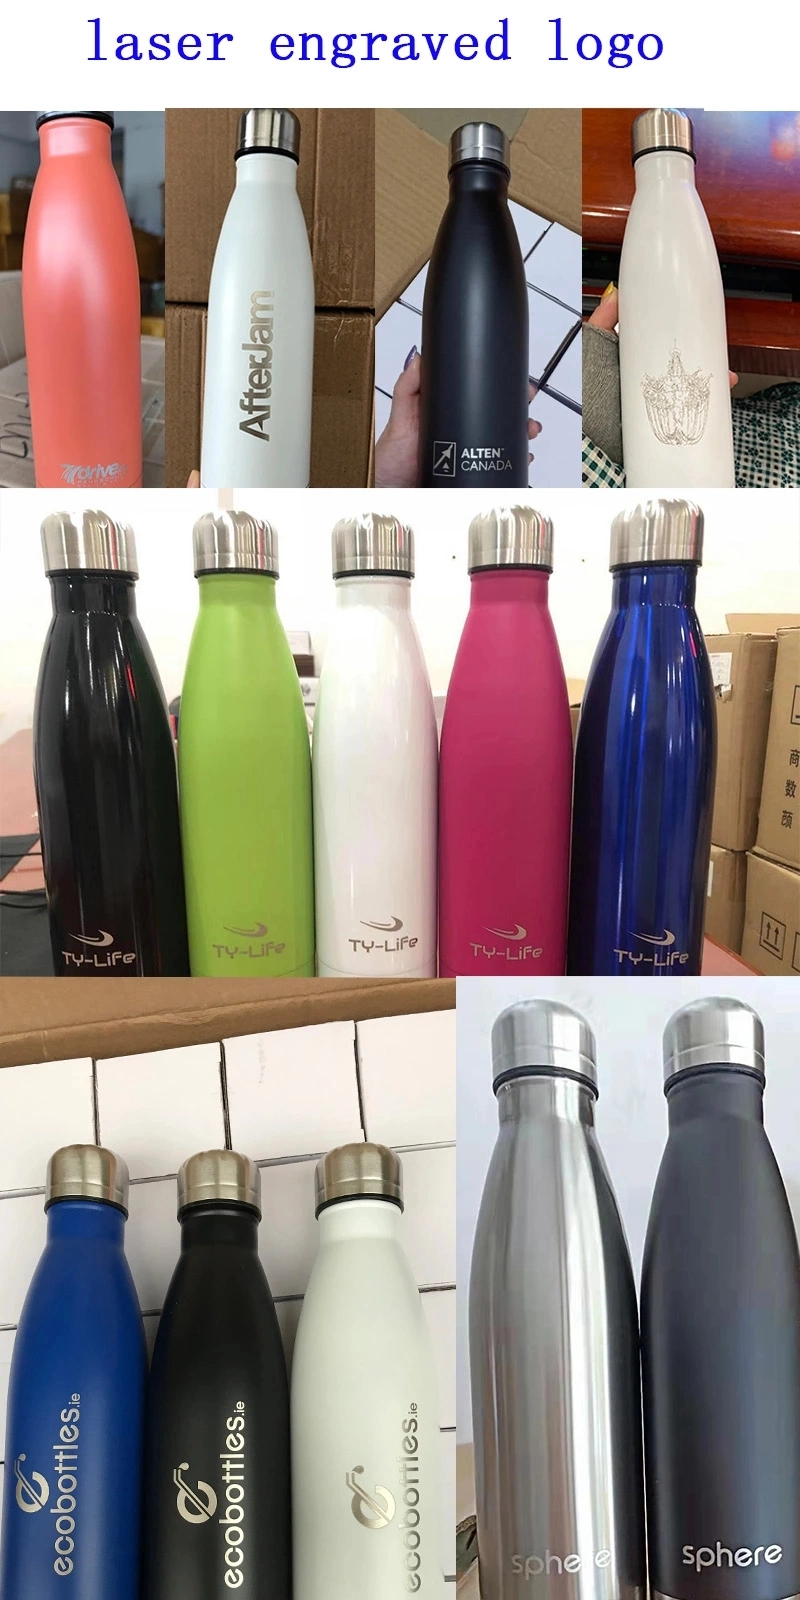 Cola Water Bottle 500ml 17oz 750ml 25oz Vacuumtravel Double Wall Stainless Steel Outdoor Thermal Insulation Bottle